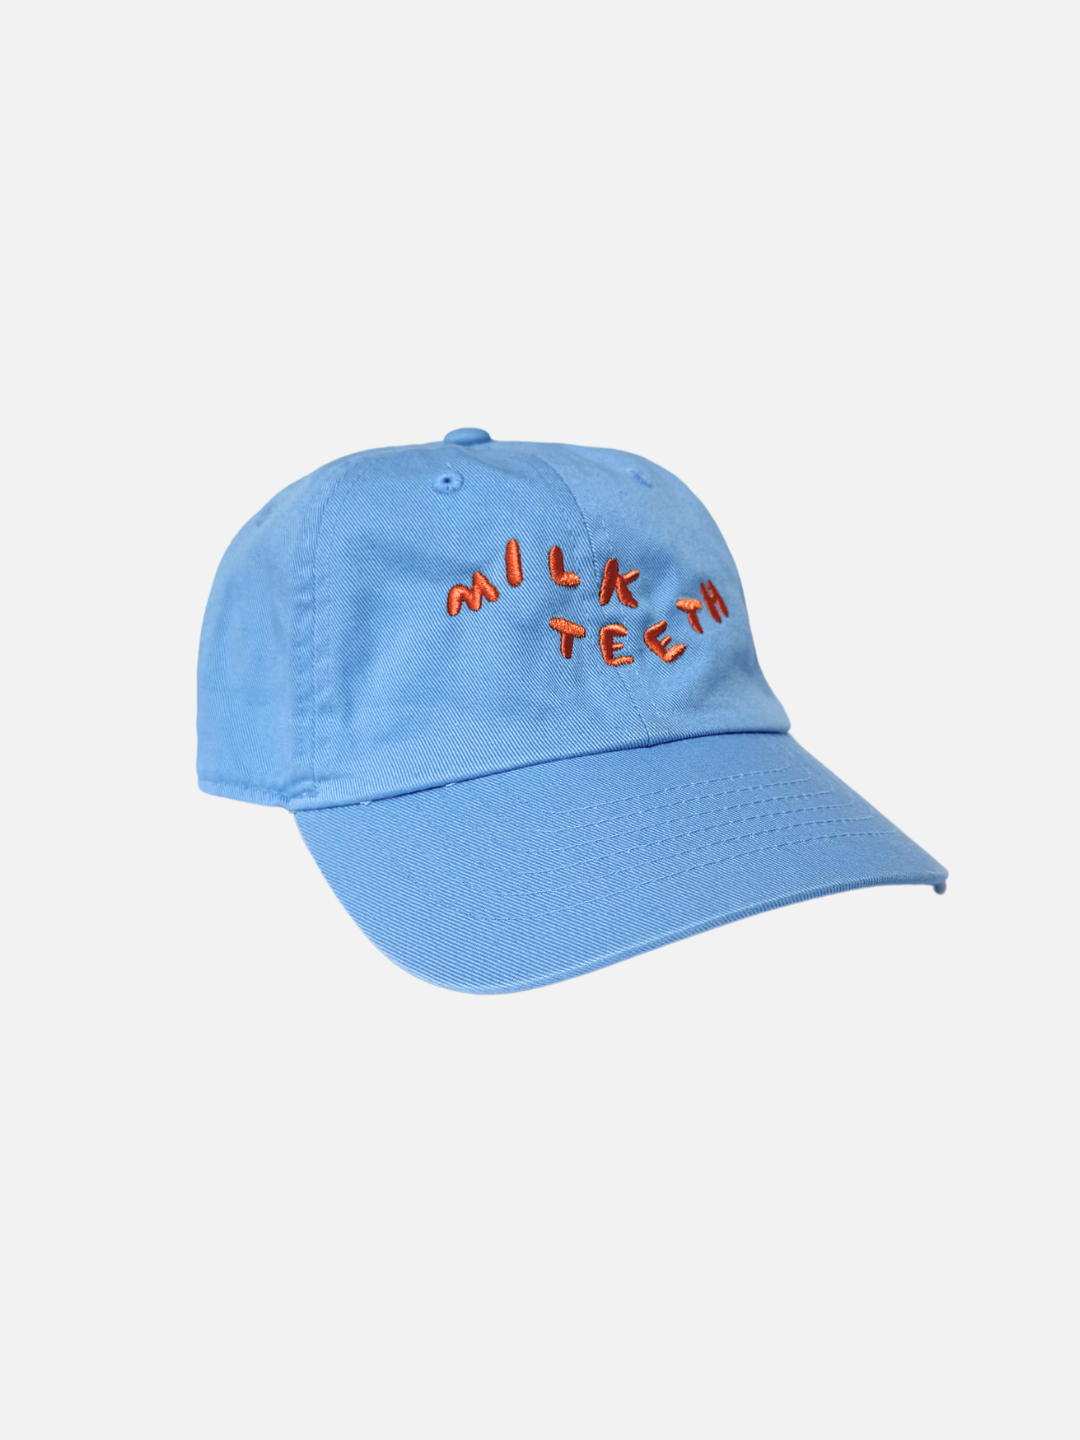 A front view of the Milk Teeth Cap with orange embroidery